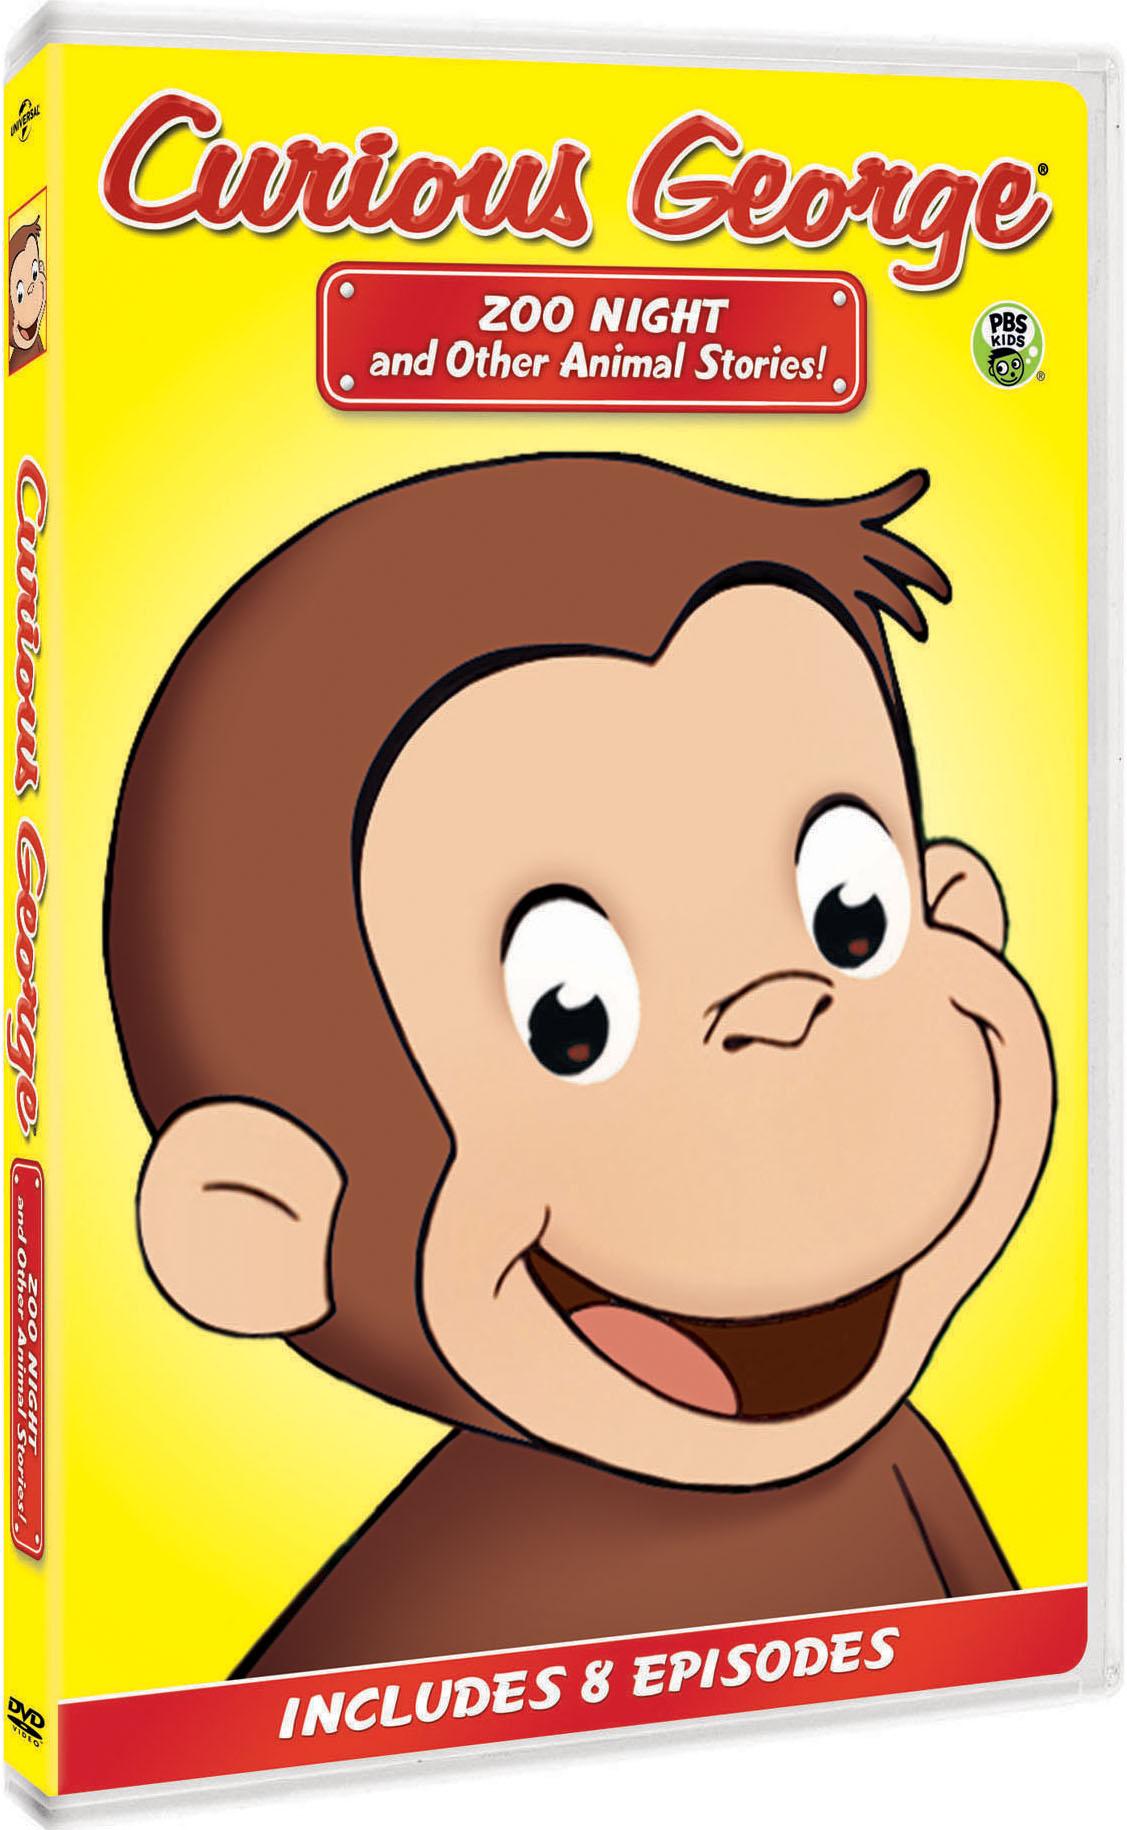 Curious George: Zoo Night and Other Animal Stories! (DVD), Universal Studios, Animation - image 2 of 2